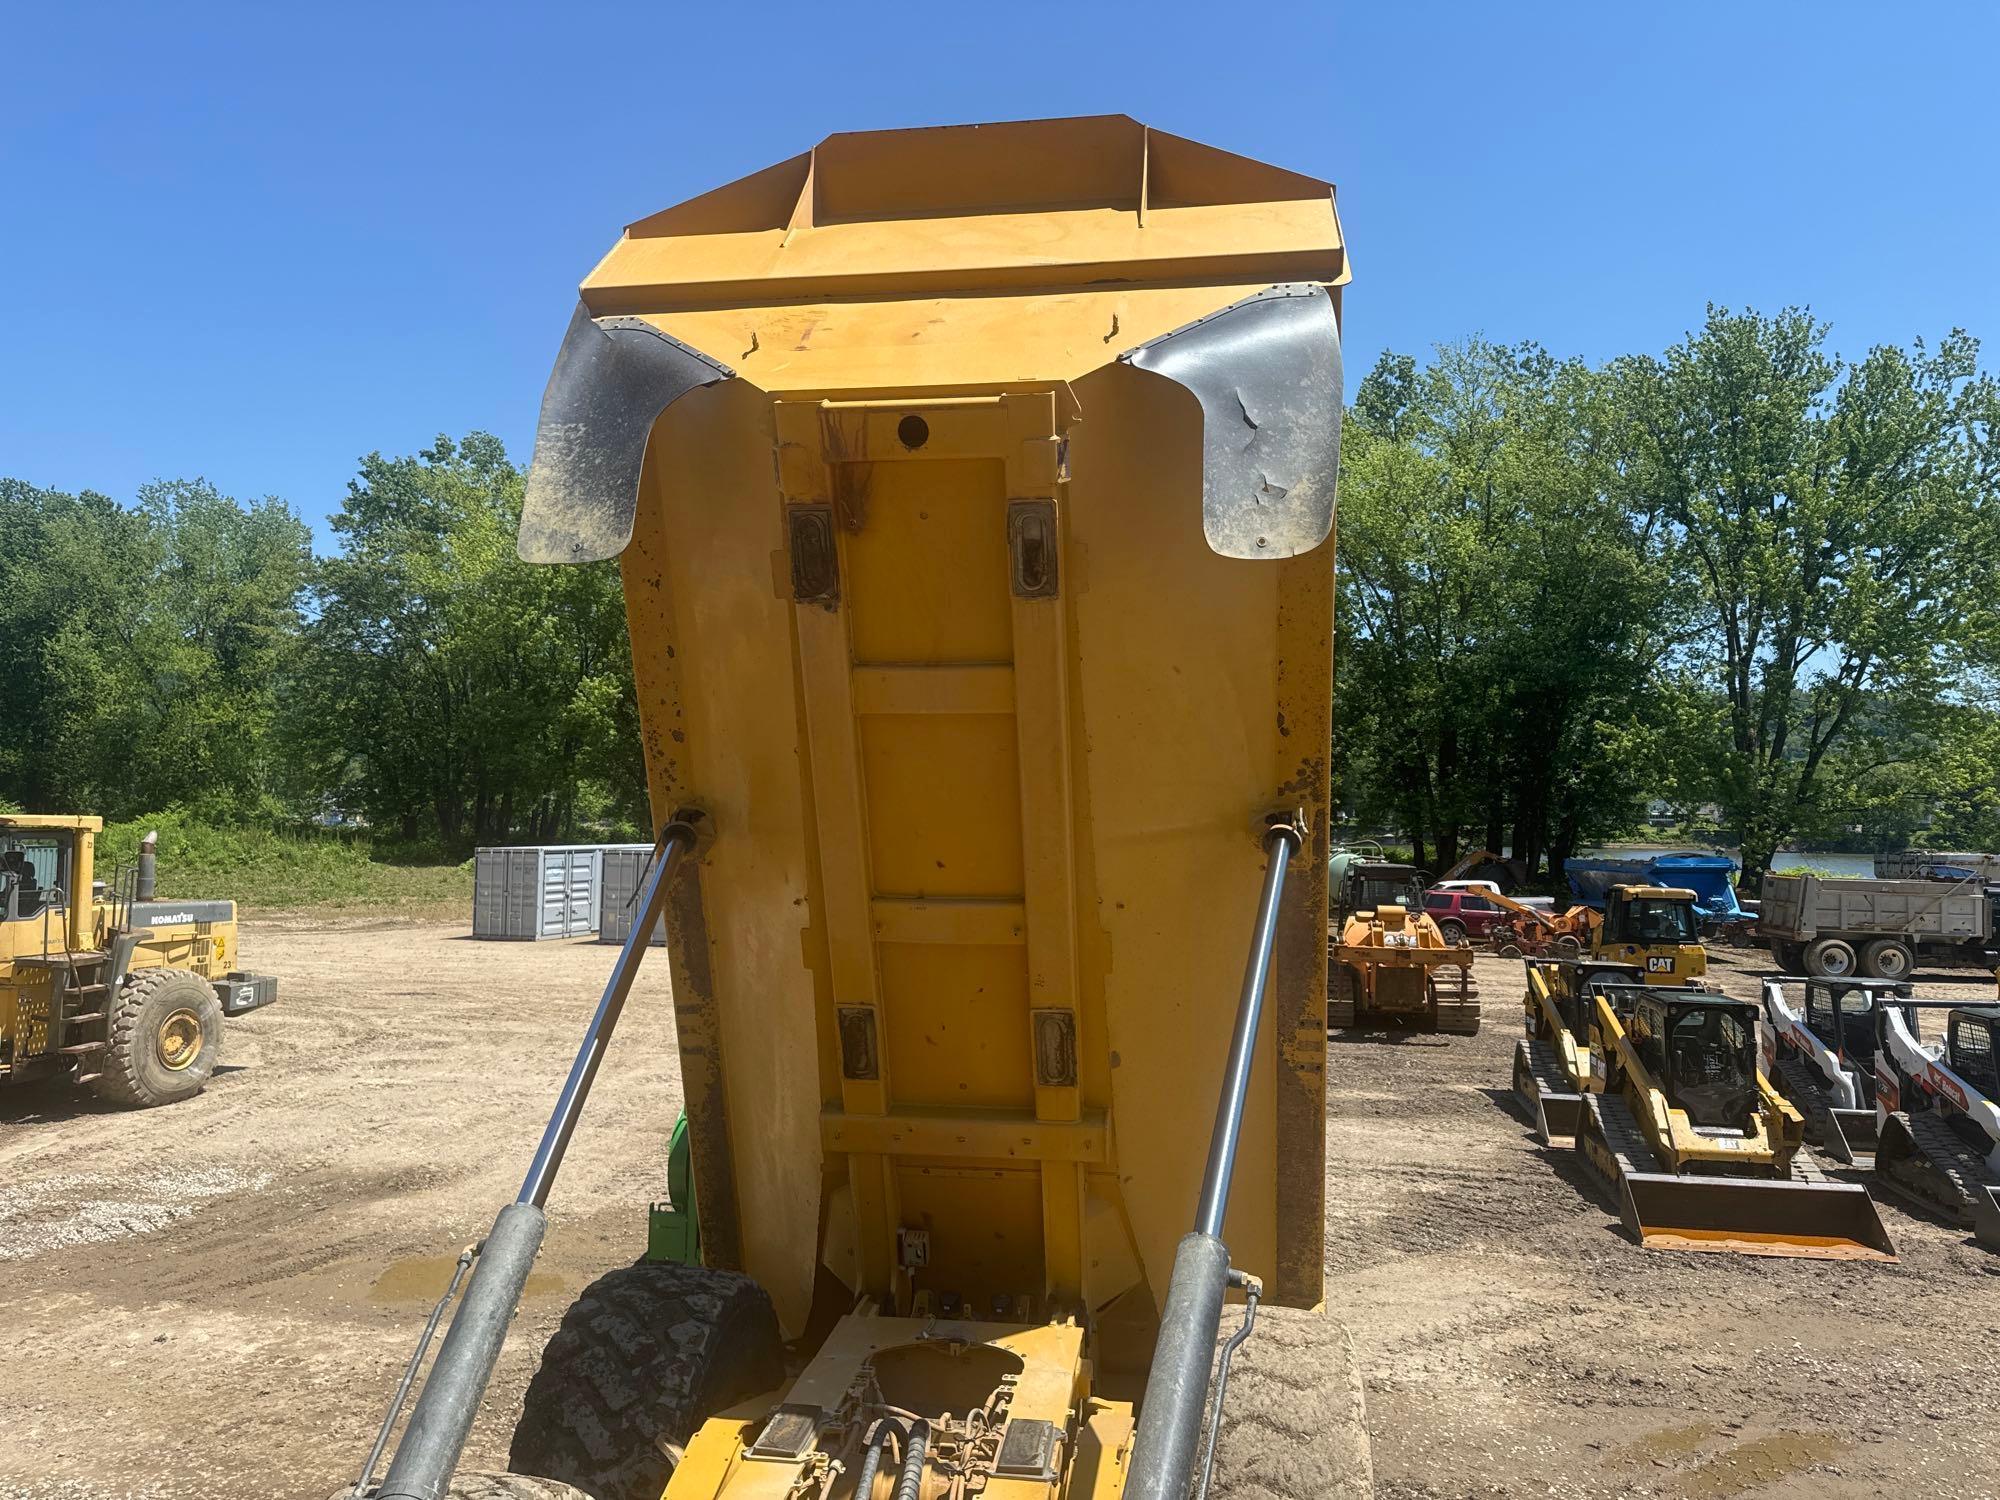 2018 CAT 745 ARTICULATED HAUL TRUCK SN:3T600388 6x6, powered by Cat C18 diesel engine, equipped with